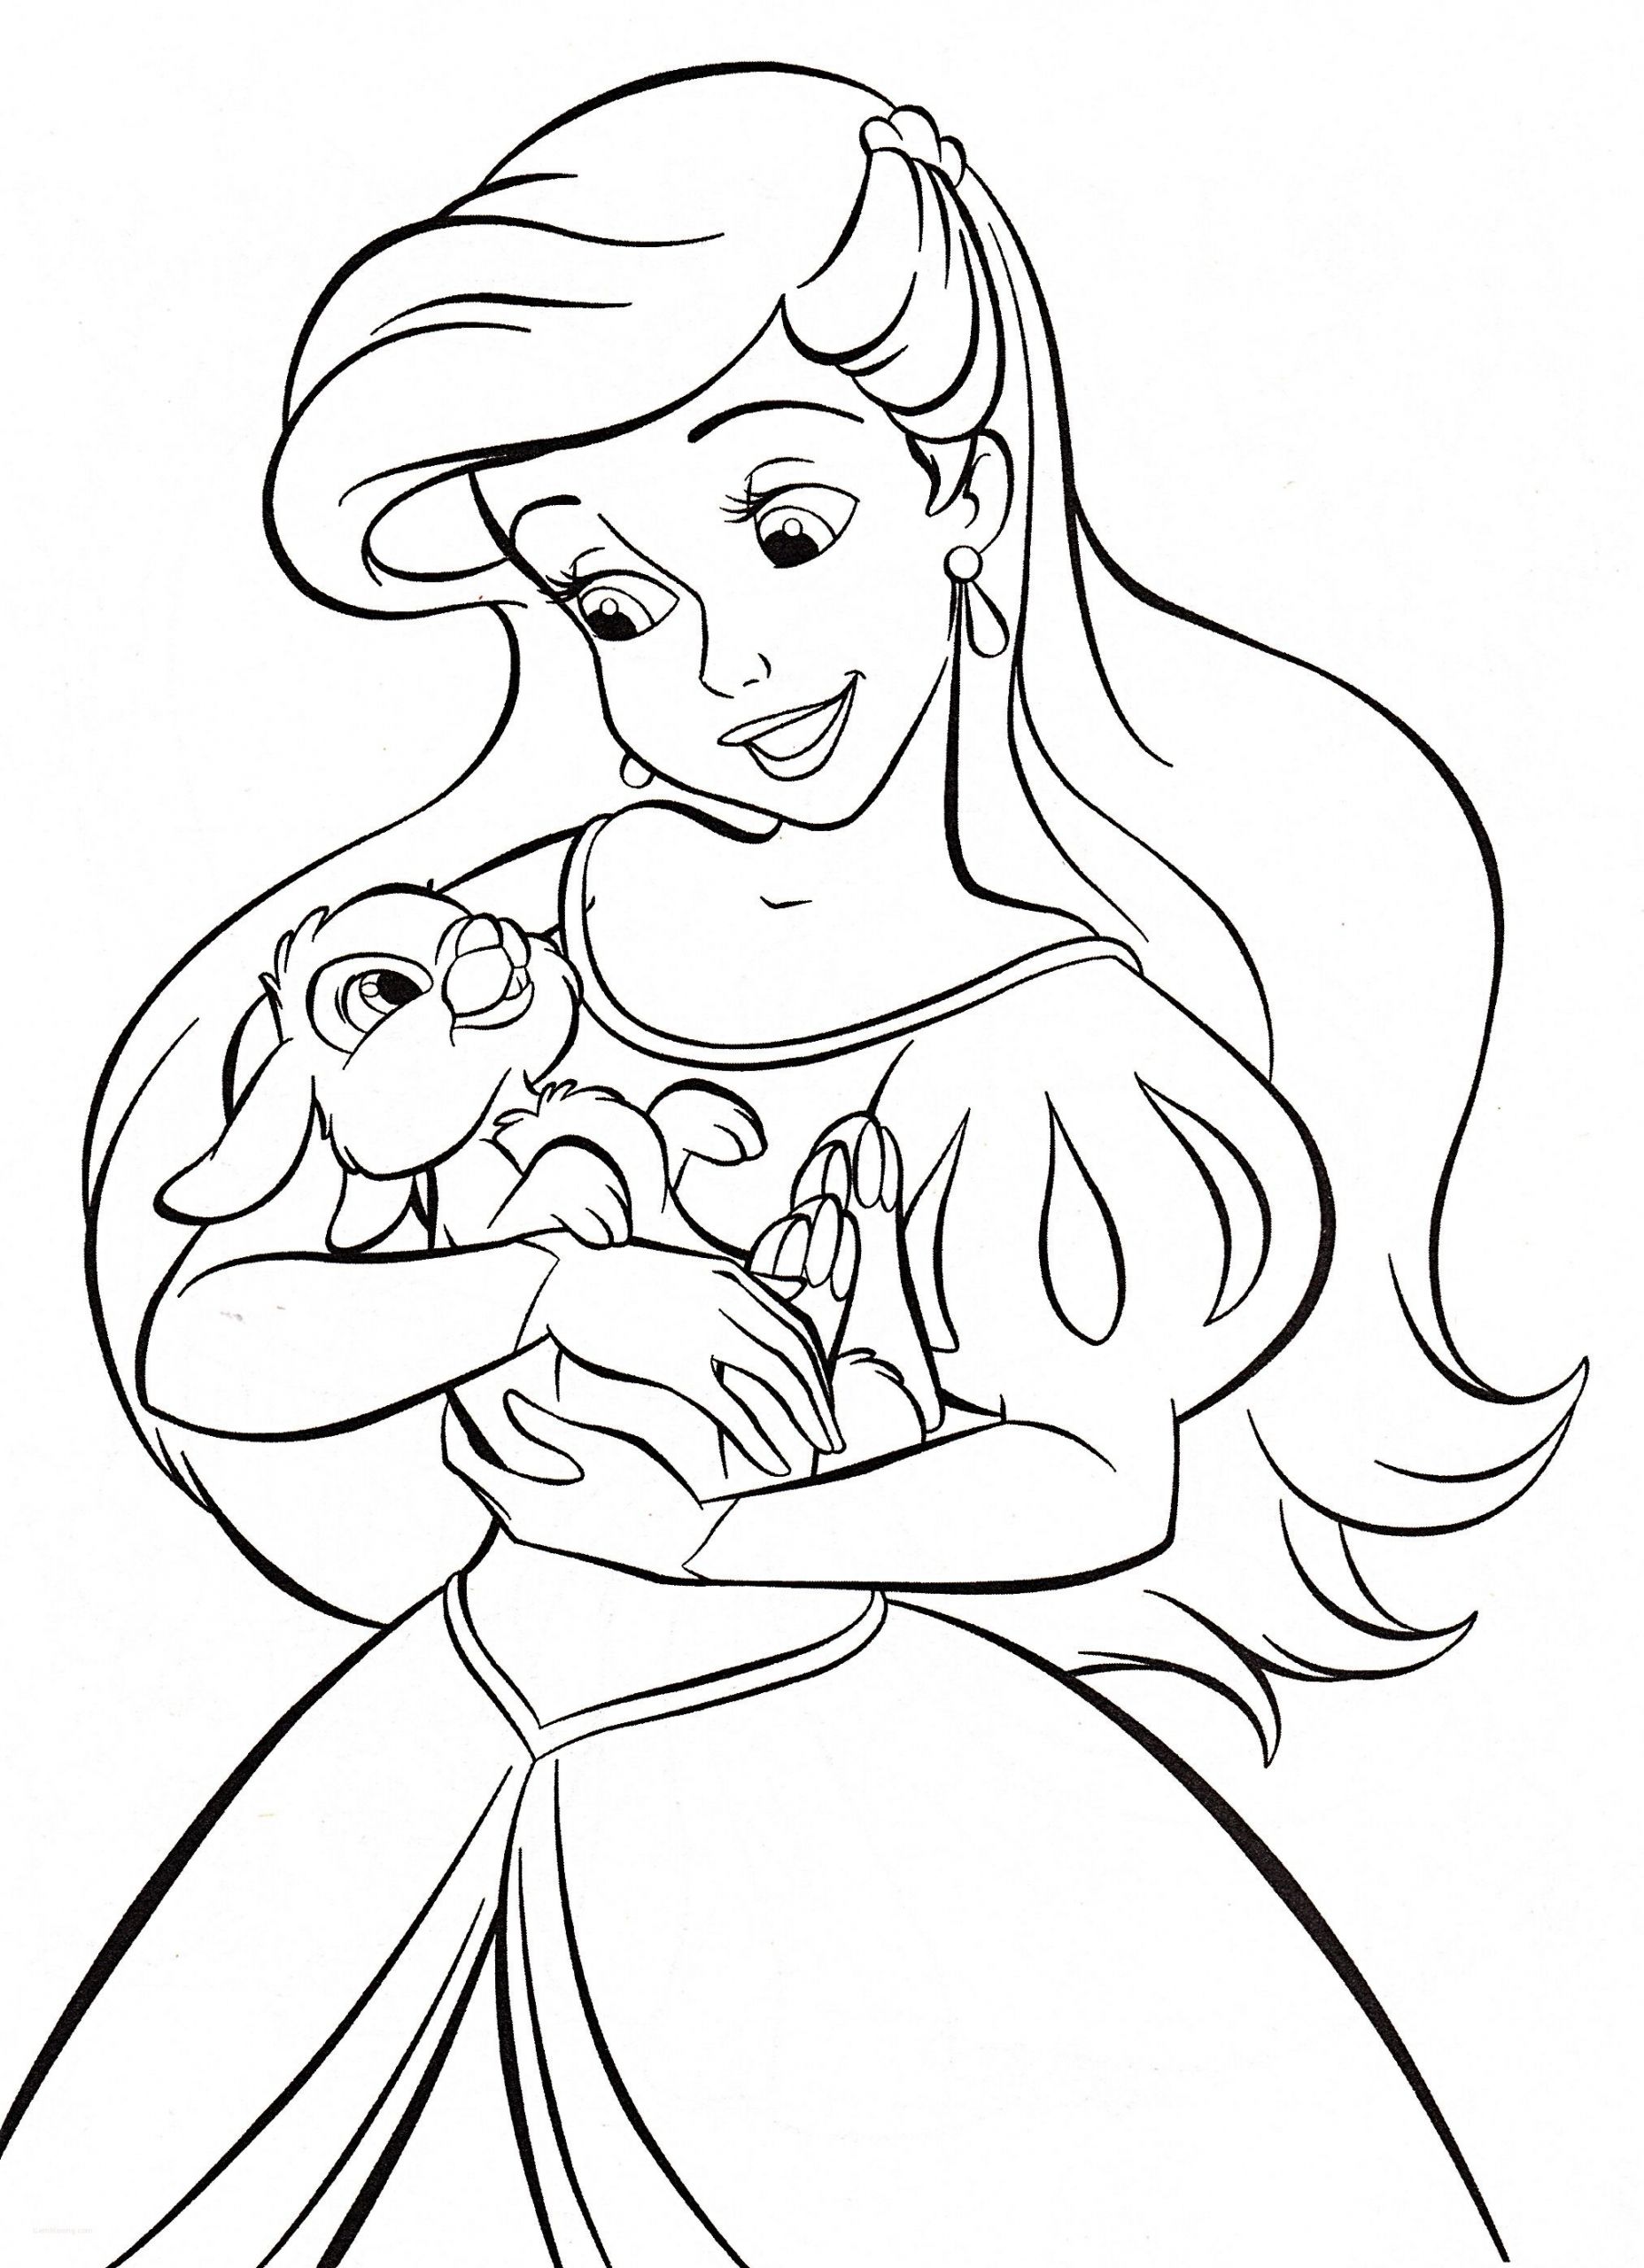 coloring pages : Princess Coloring Sheets Luxury Walt Disney Coloring Pages  Princess Ariel Walt Disney Princess Coloring Sheets ~ peak